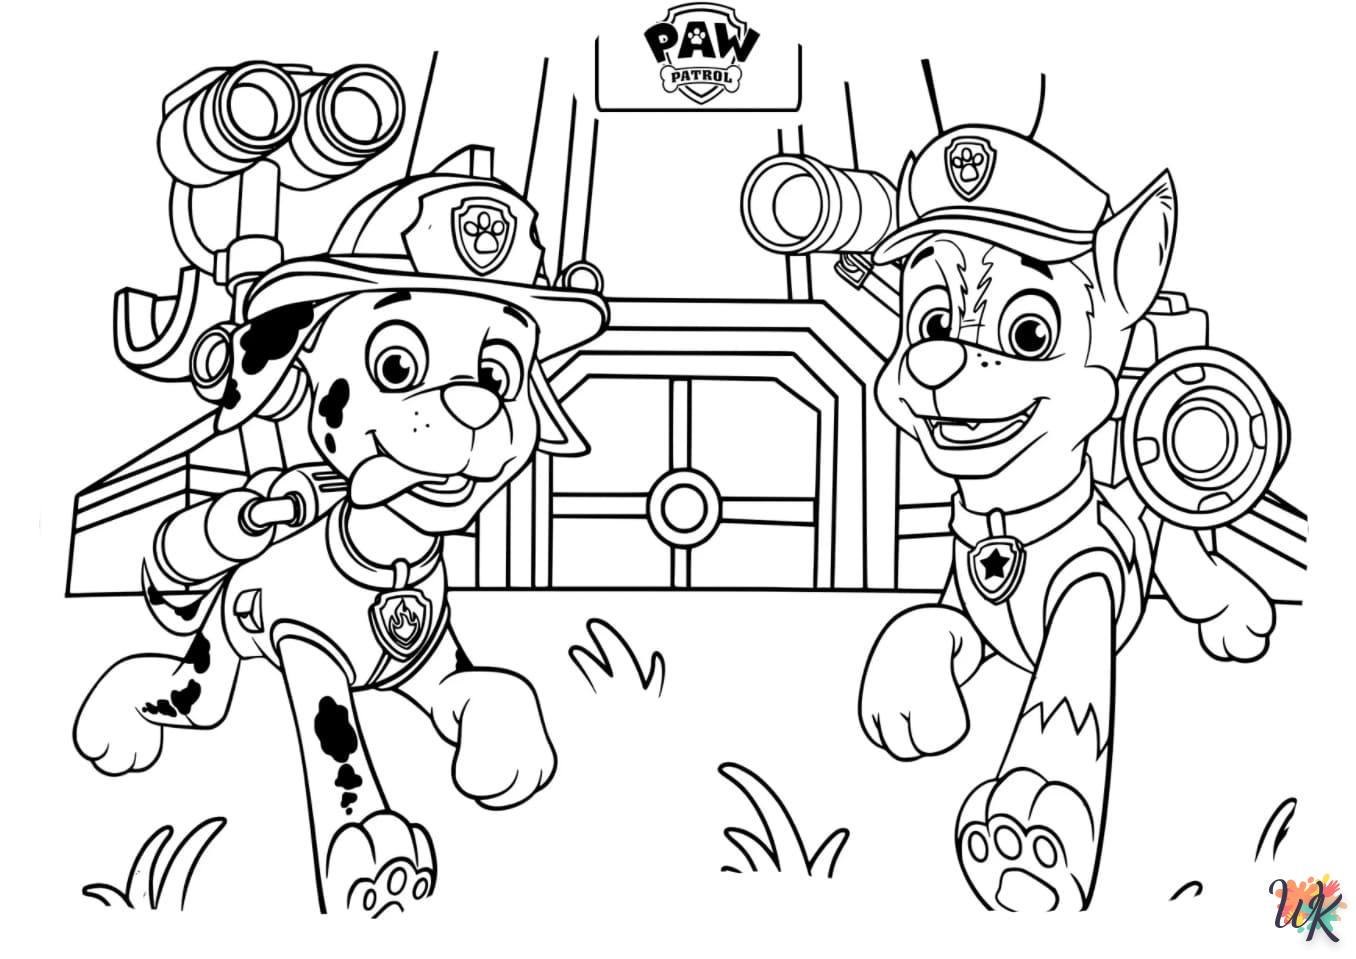 Paw Patrol coloring page to print for 10 year olds